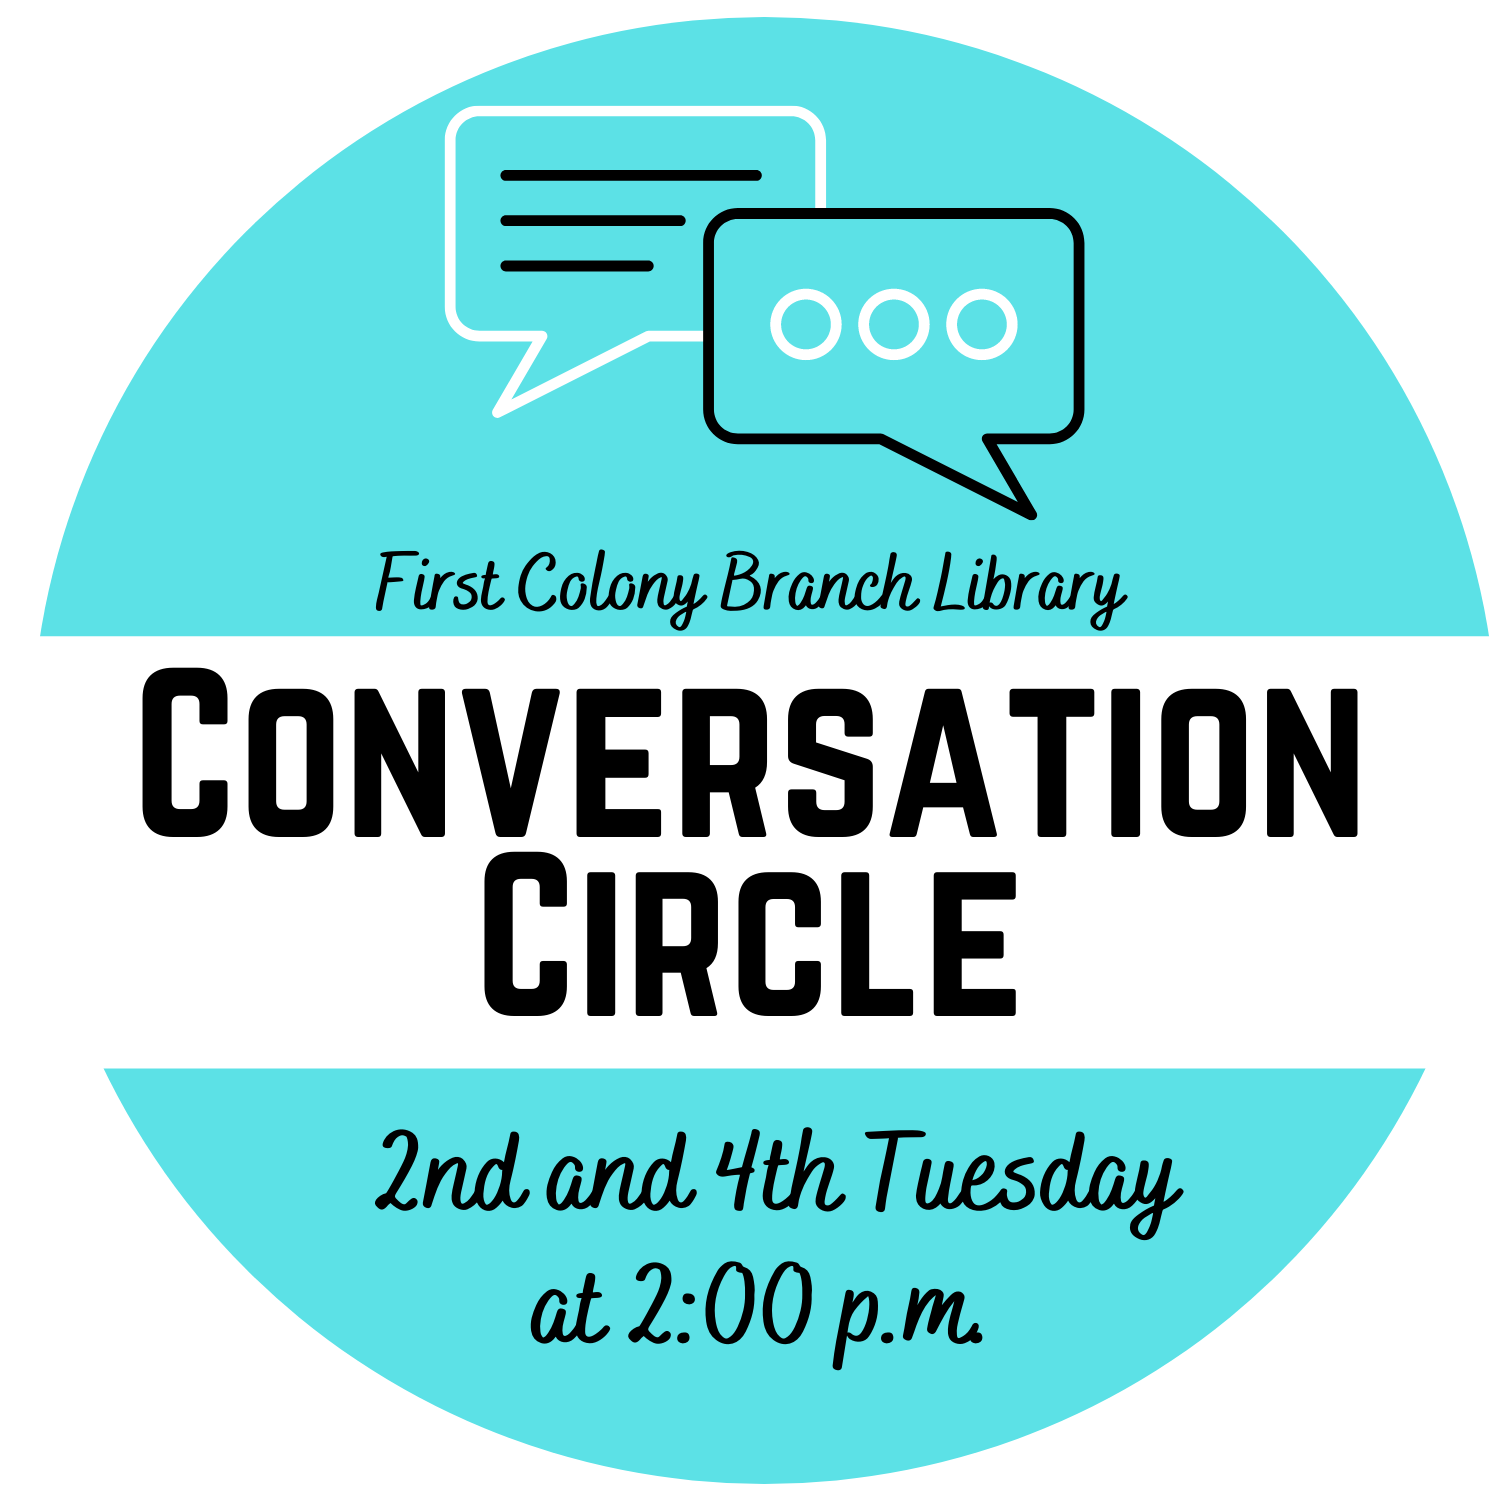 conversation cirlce text in black on teal circle with white bar across middle